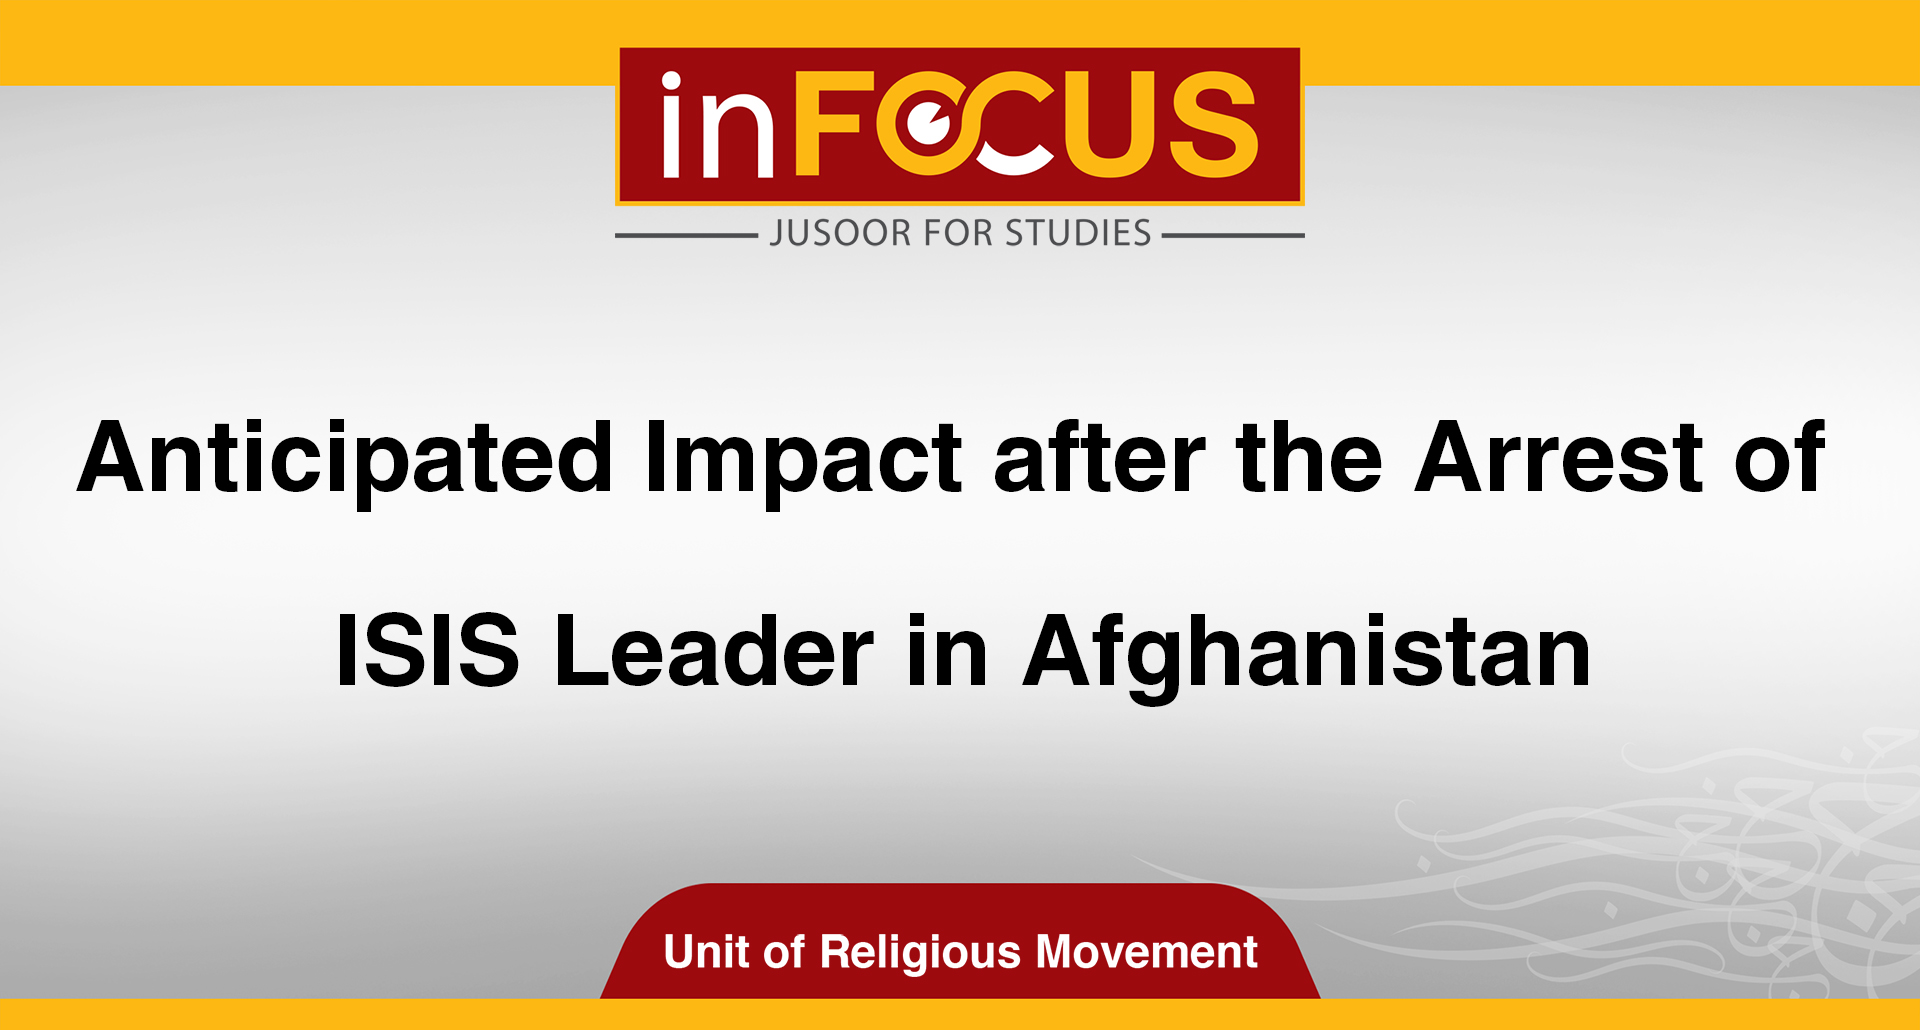 Anticipated Impact after the Arrest of ISIS Leader in Afghanistan